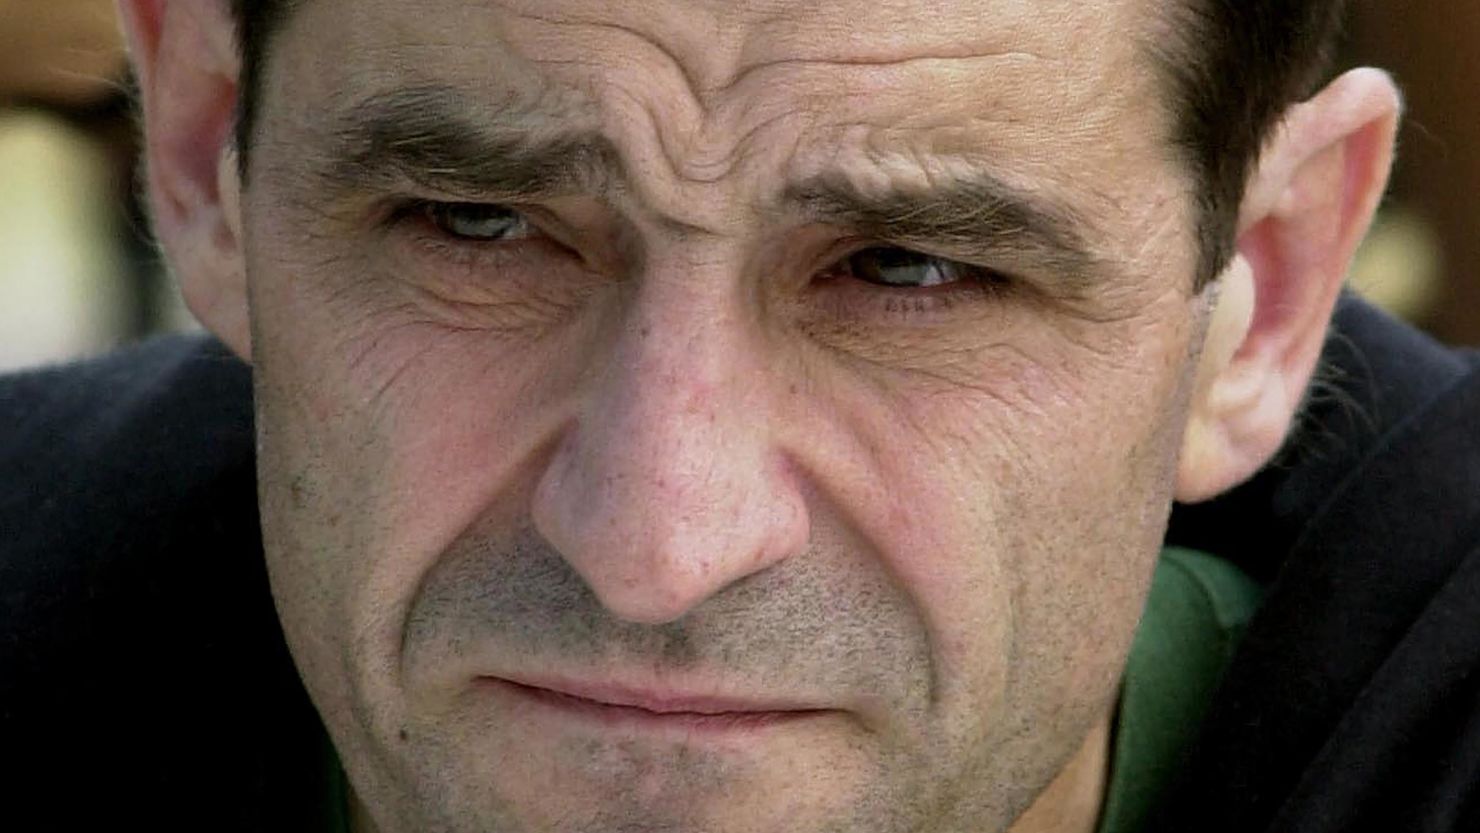 Josu Ternera, a former leader of the Basque separatist group ETA, is pictured in southwestern France in a file photo from September 2000.